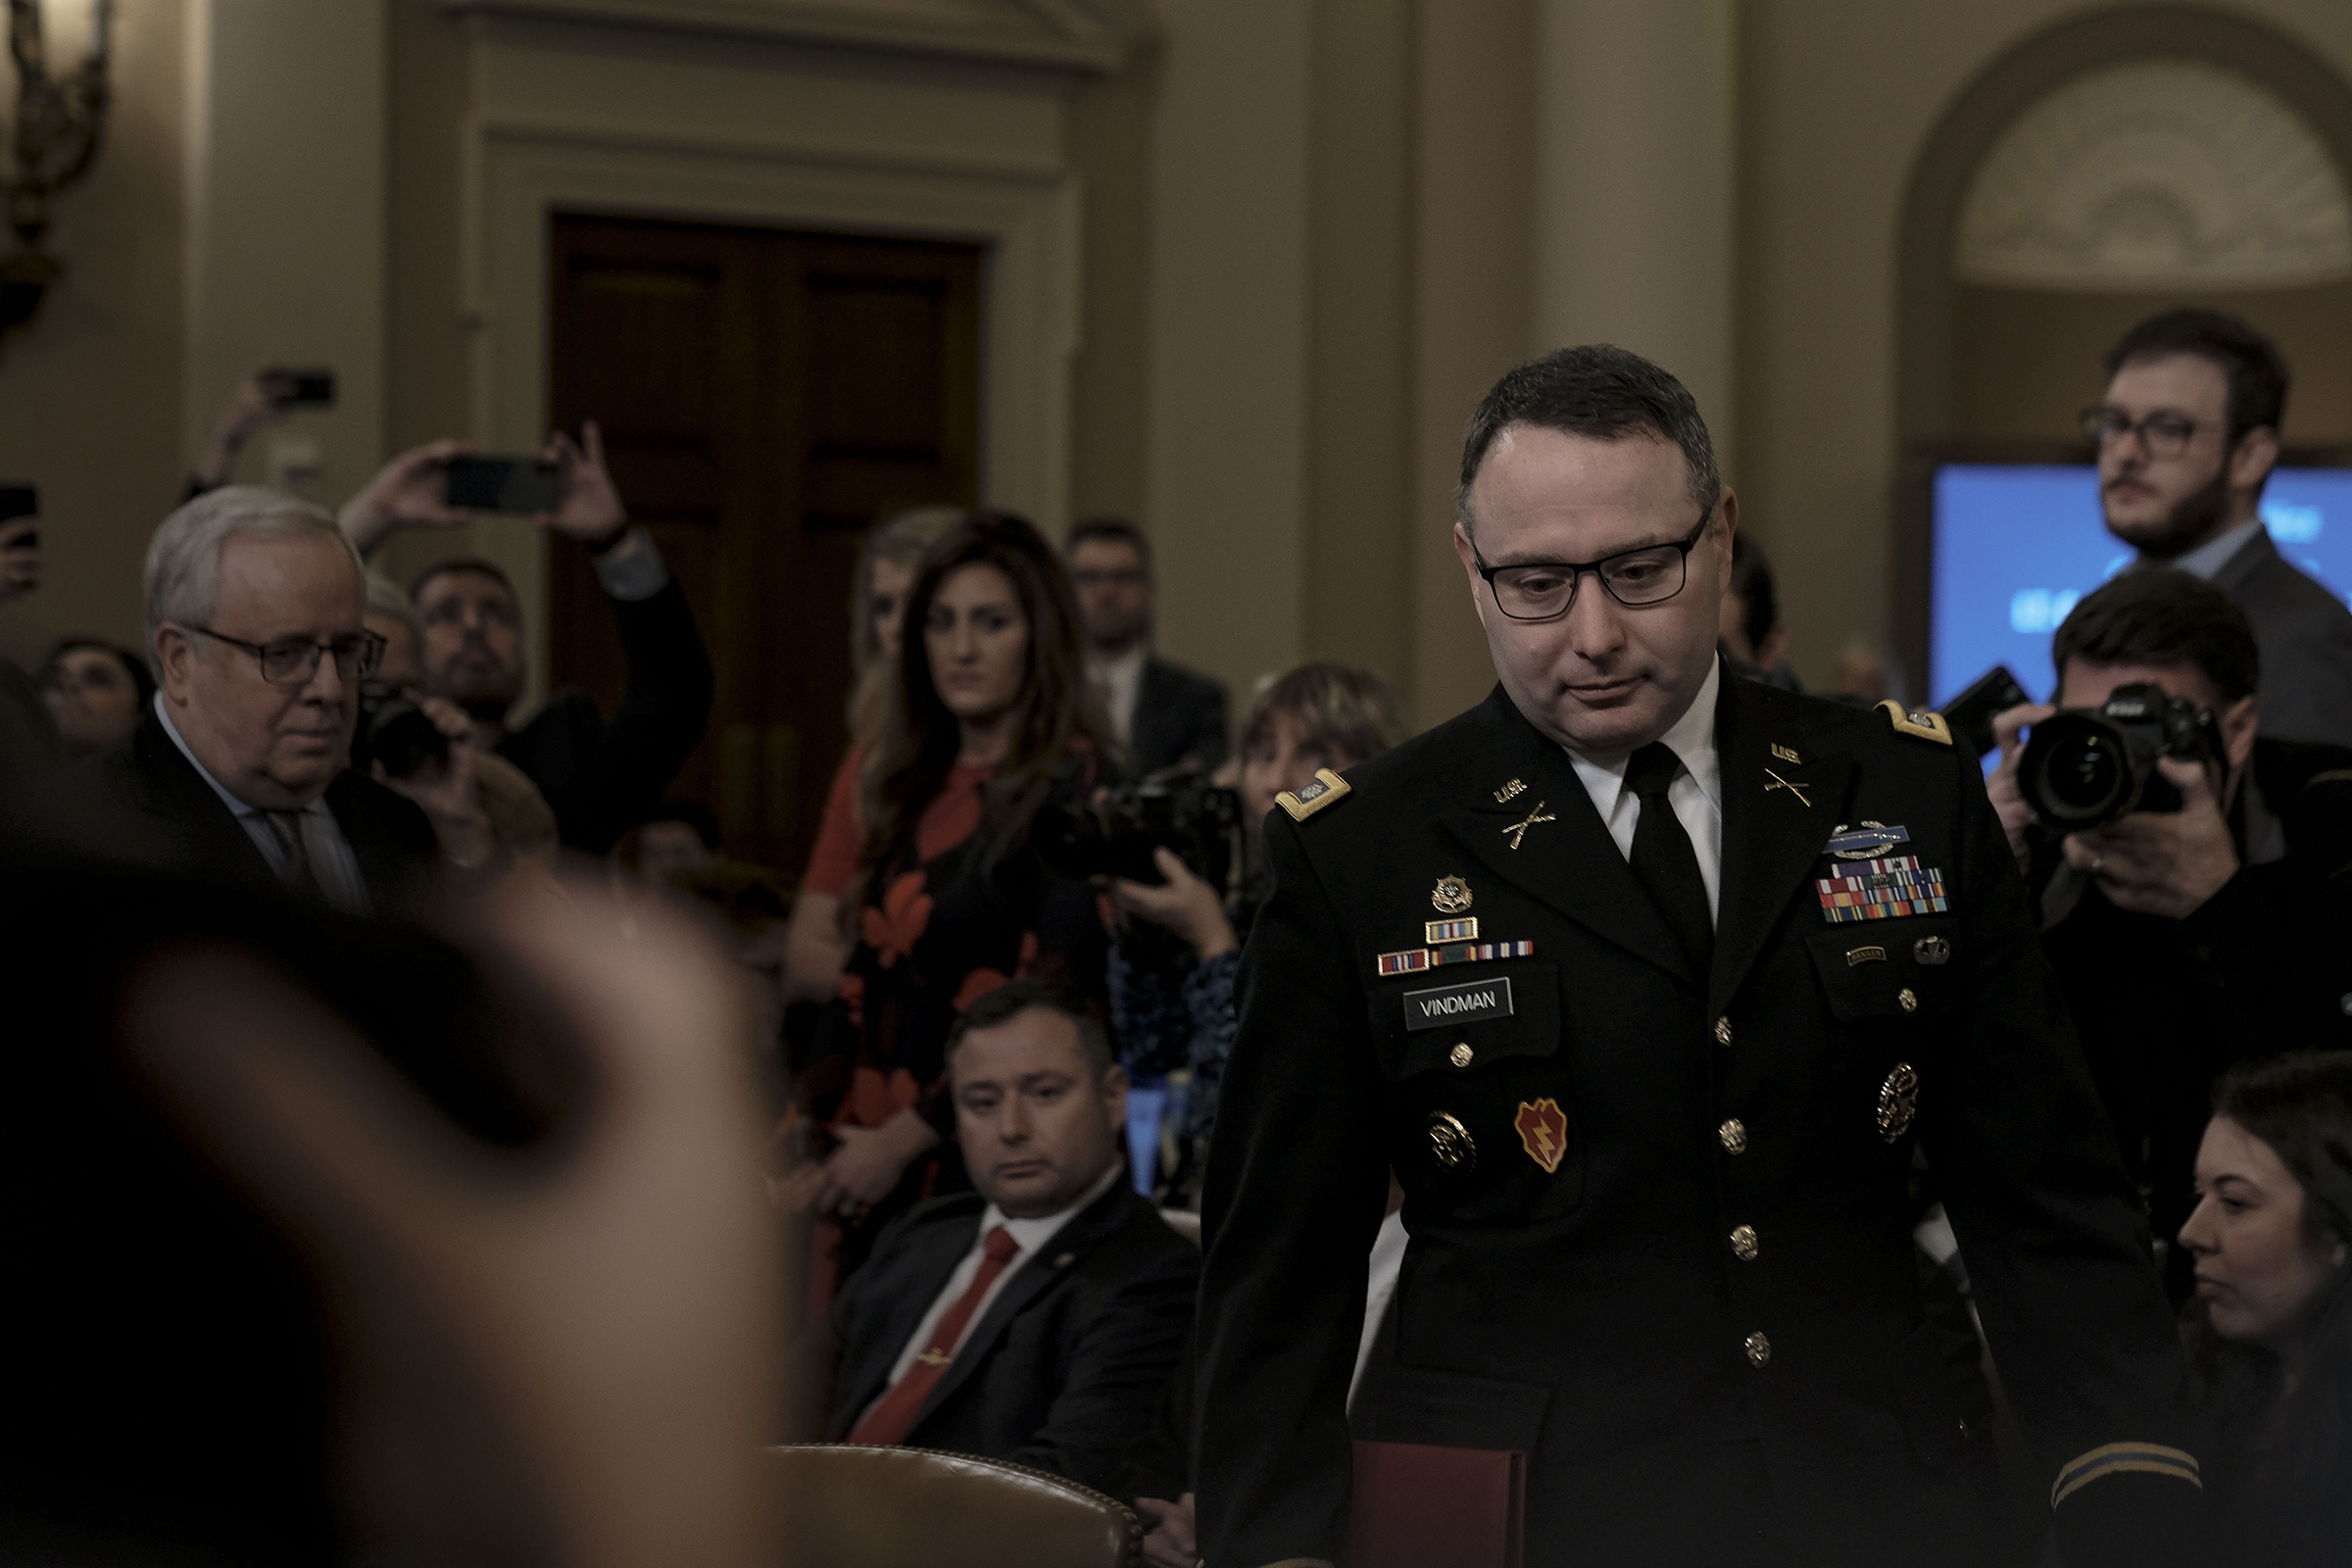 Witness Lt. Col. Alexander Vindeman, National Security Council staffer, enters the House Intelligence Committee hearing on the impeachment inquiry on Capitol Hill in Washington, D.C. on Nov. 19, 2019. Gabriella Demczuk / TIME (Gabriella Demczuk for TIME)